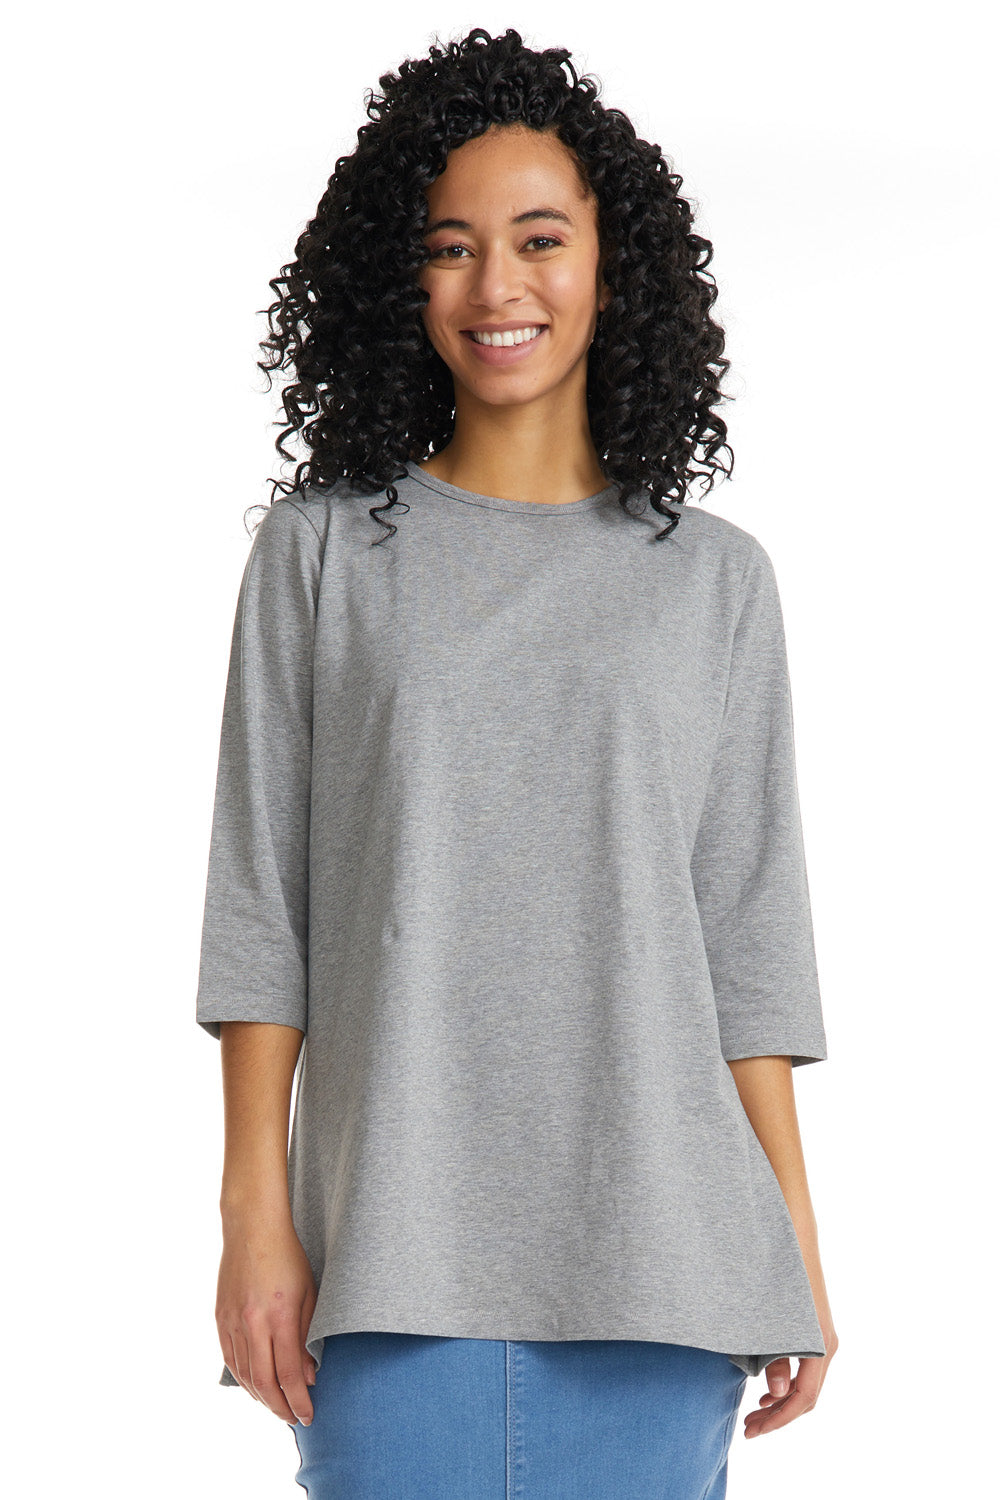 Casual gray 3/4 sleeve baggy t-shirt for women